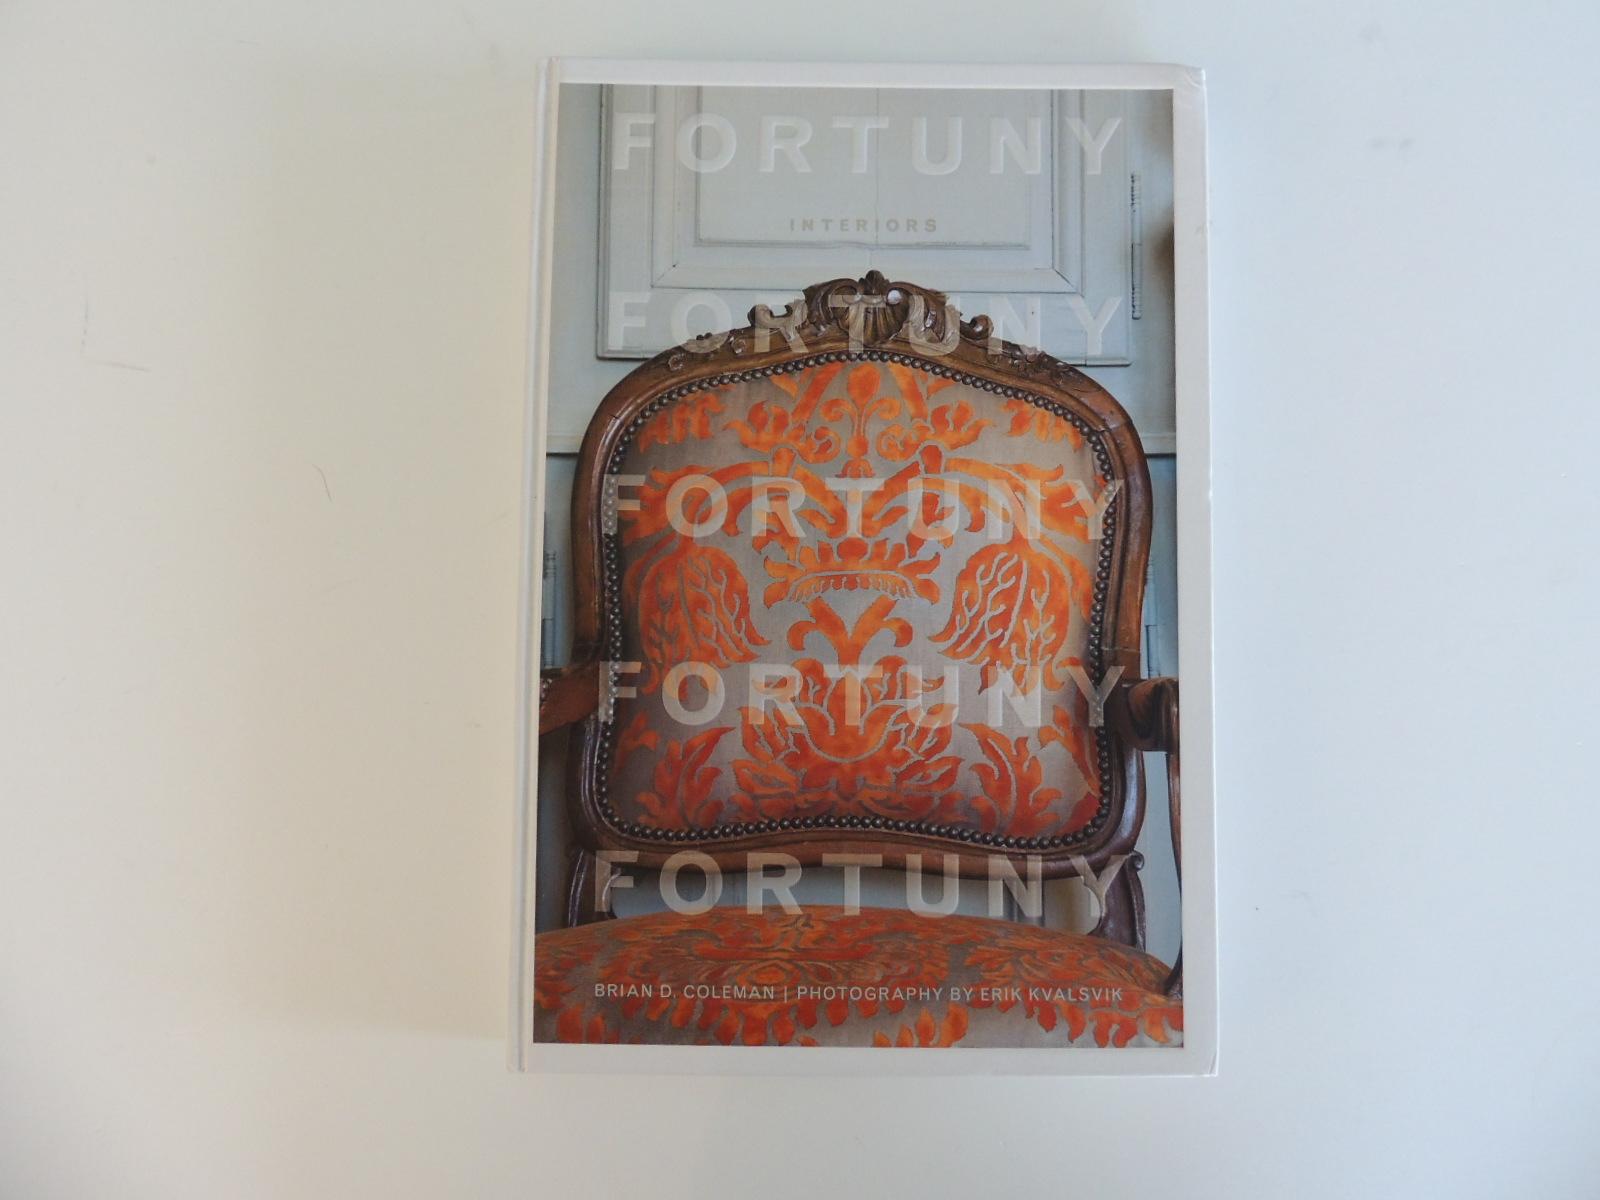 Fortuny interiors hardcover book.
Mariano Fortuny y Madrazo was a Spanish fashion designer who opened his couture house in 1906 and continued until 1946. He was the son of the painter Mariano Fortuny y Marsal.
  